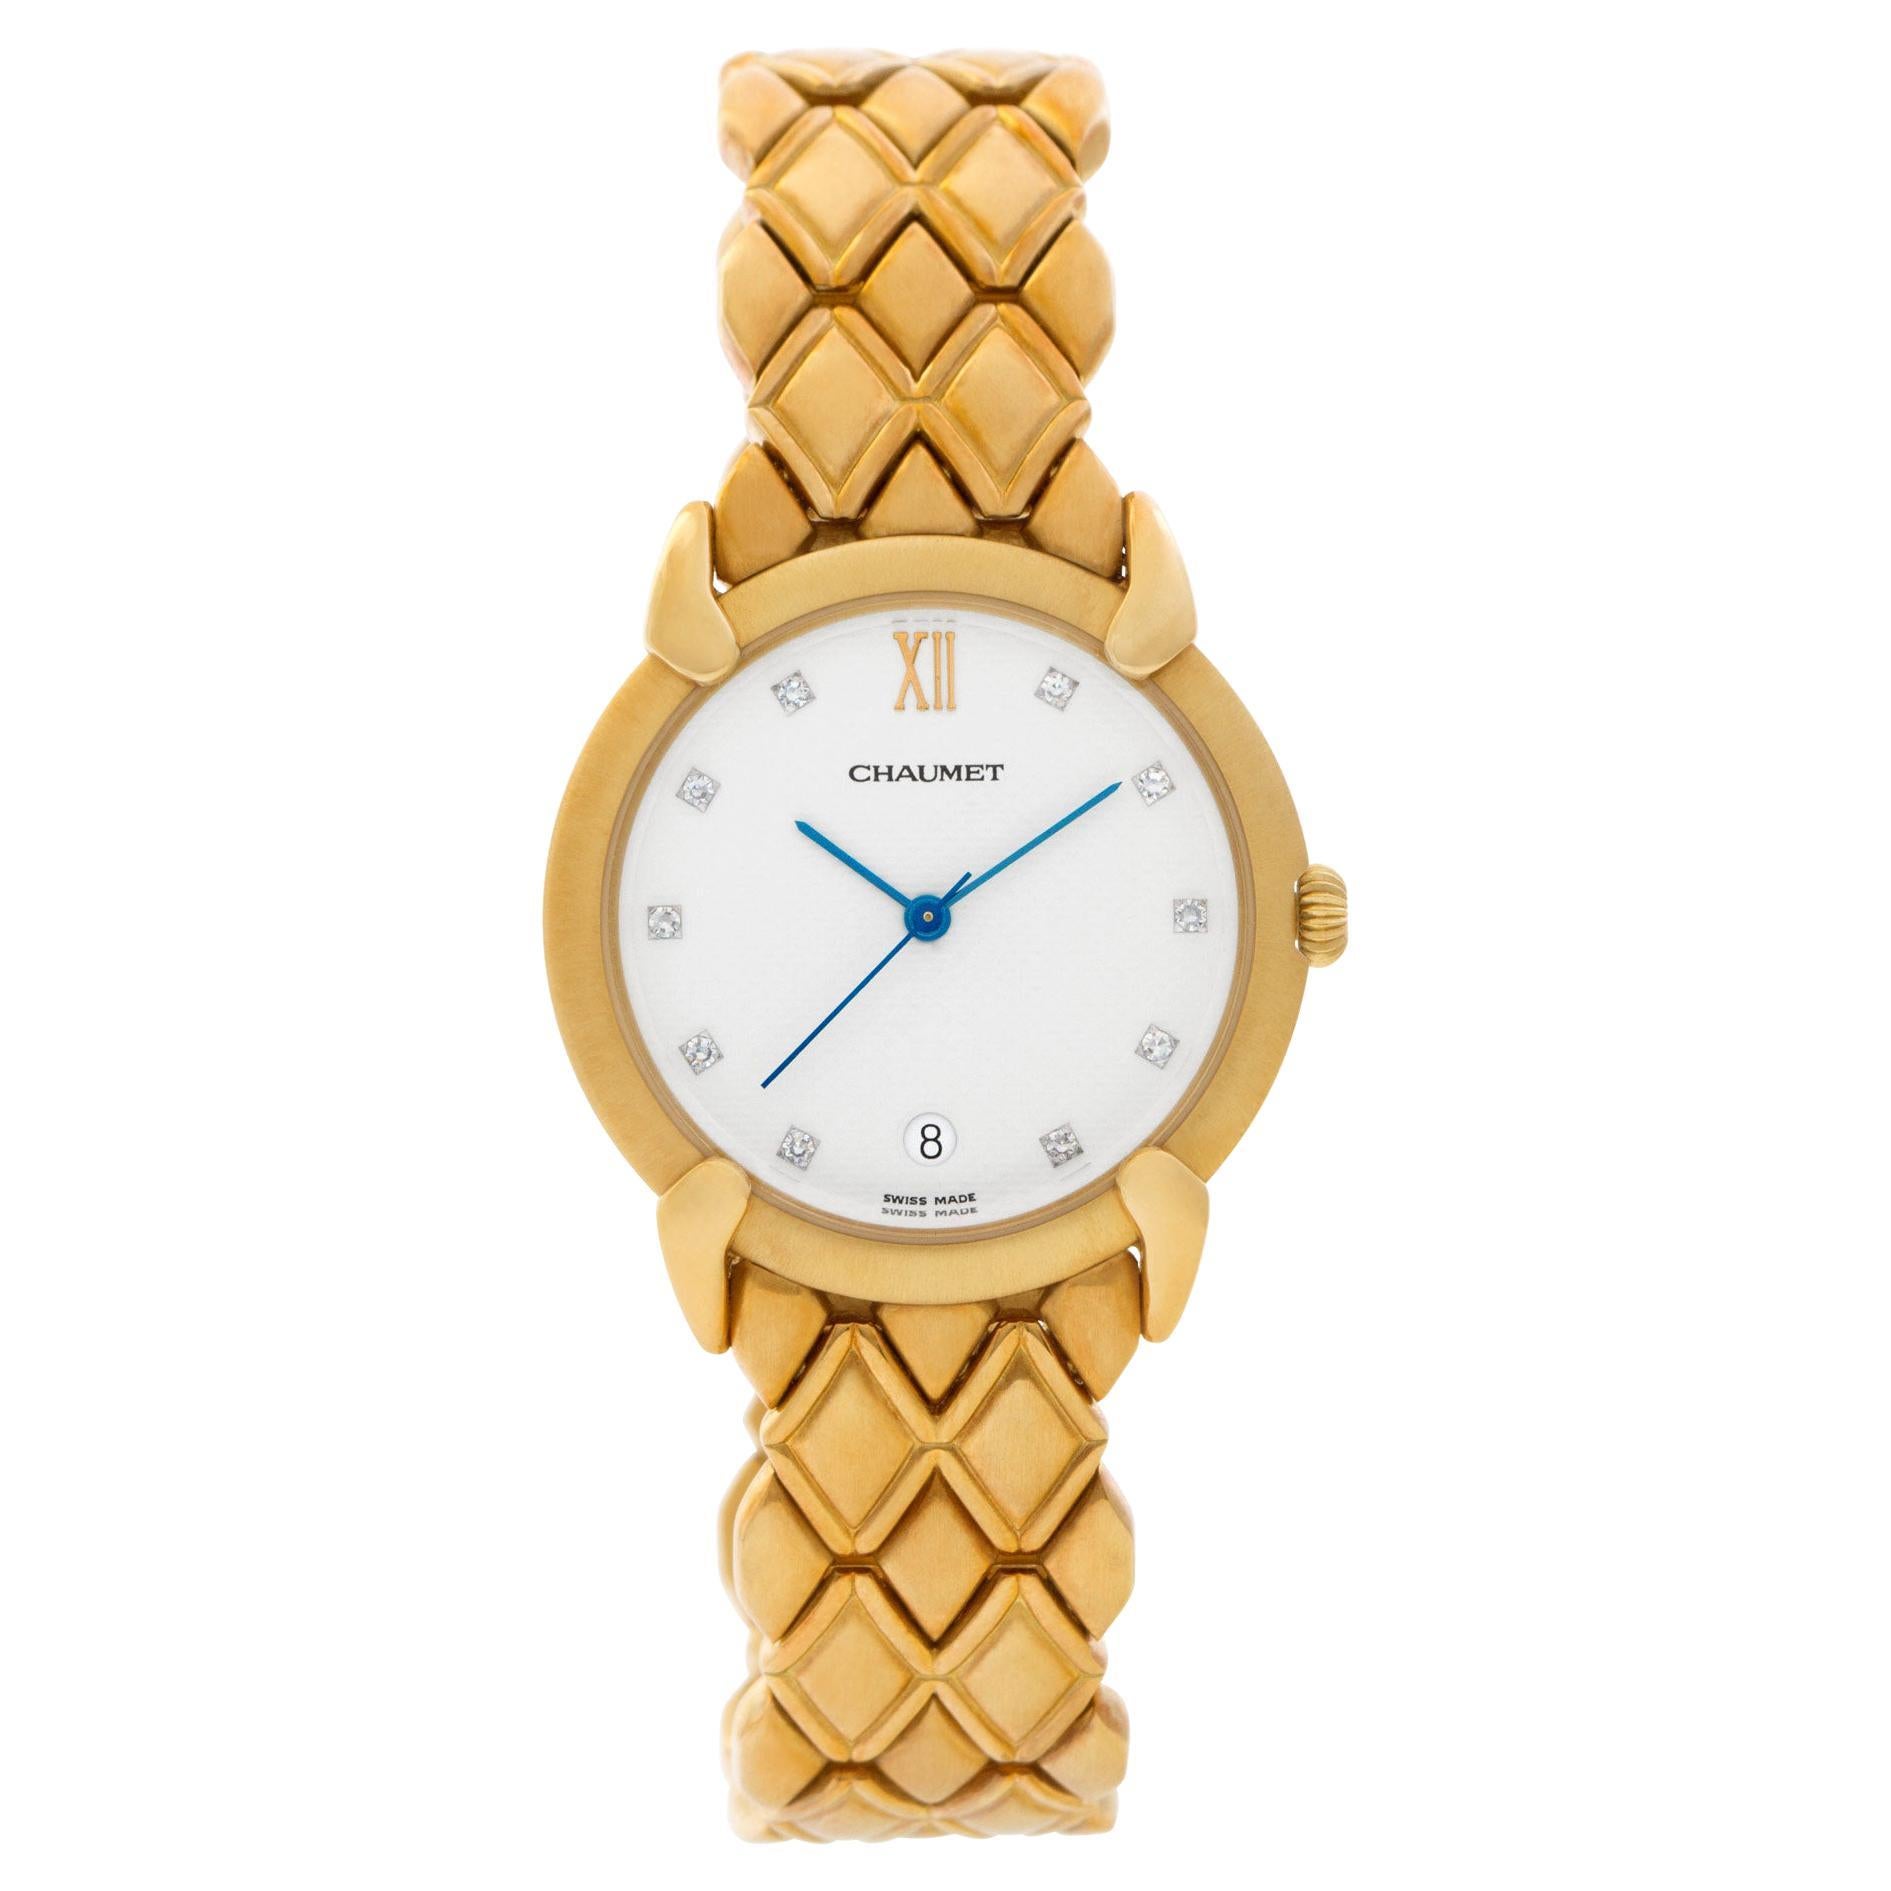 Chaumet Classic Watch in 18k Yellow Gold with Original Diamond Dial